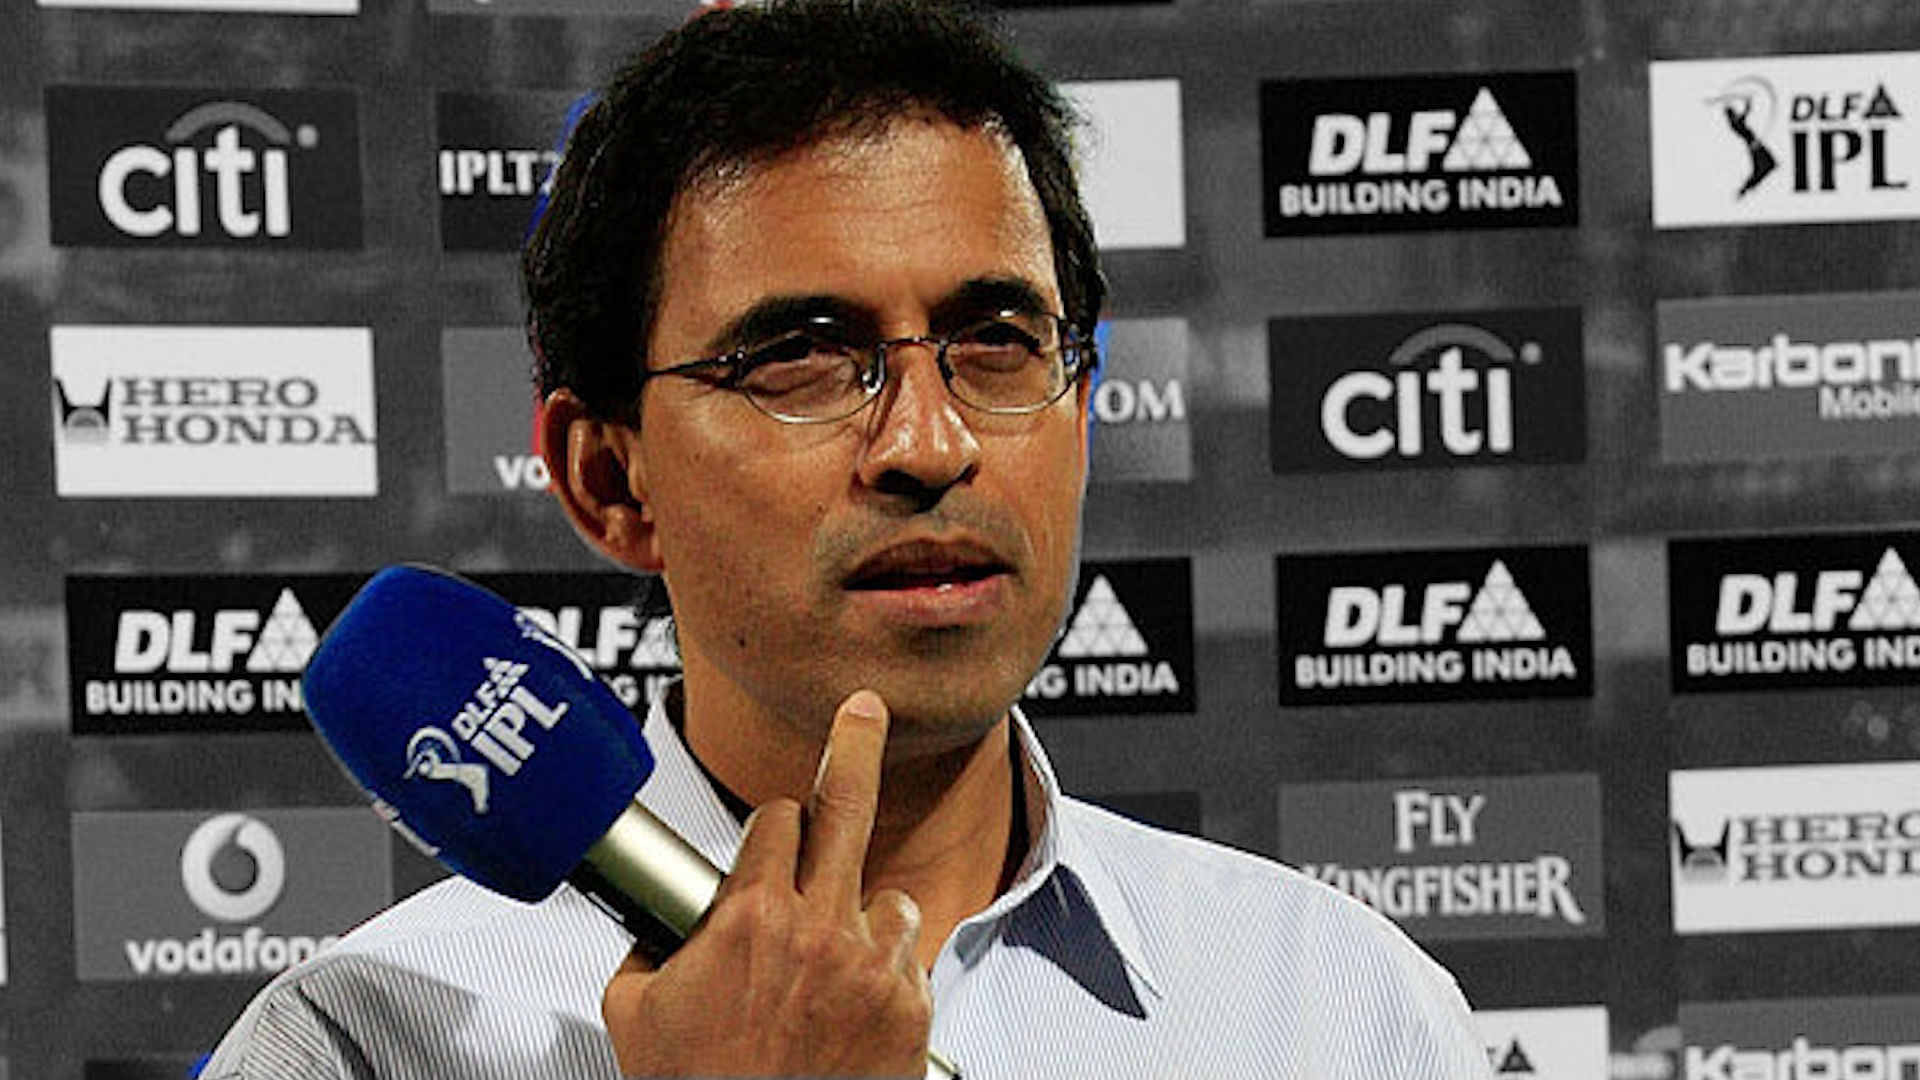 Harsha Bhogle has called out people who are not adhering to the Coronavirus guidelines and partying after travel